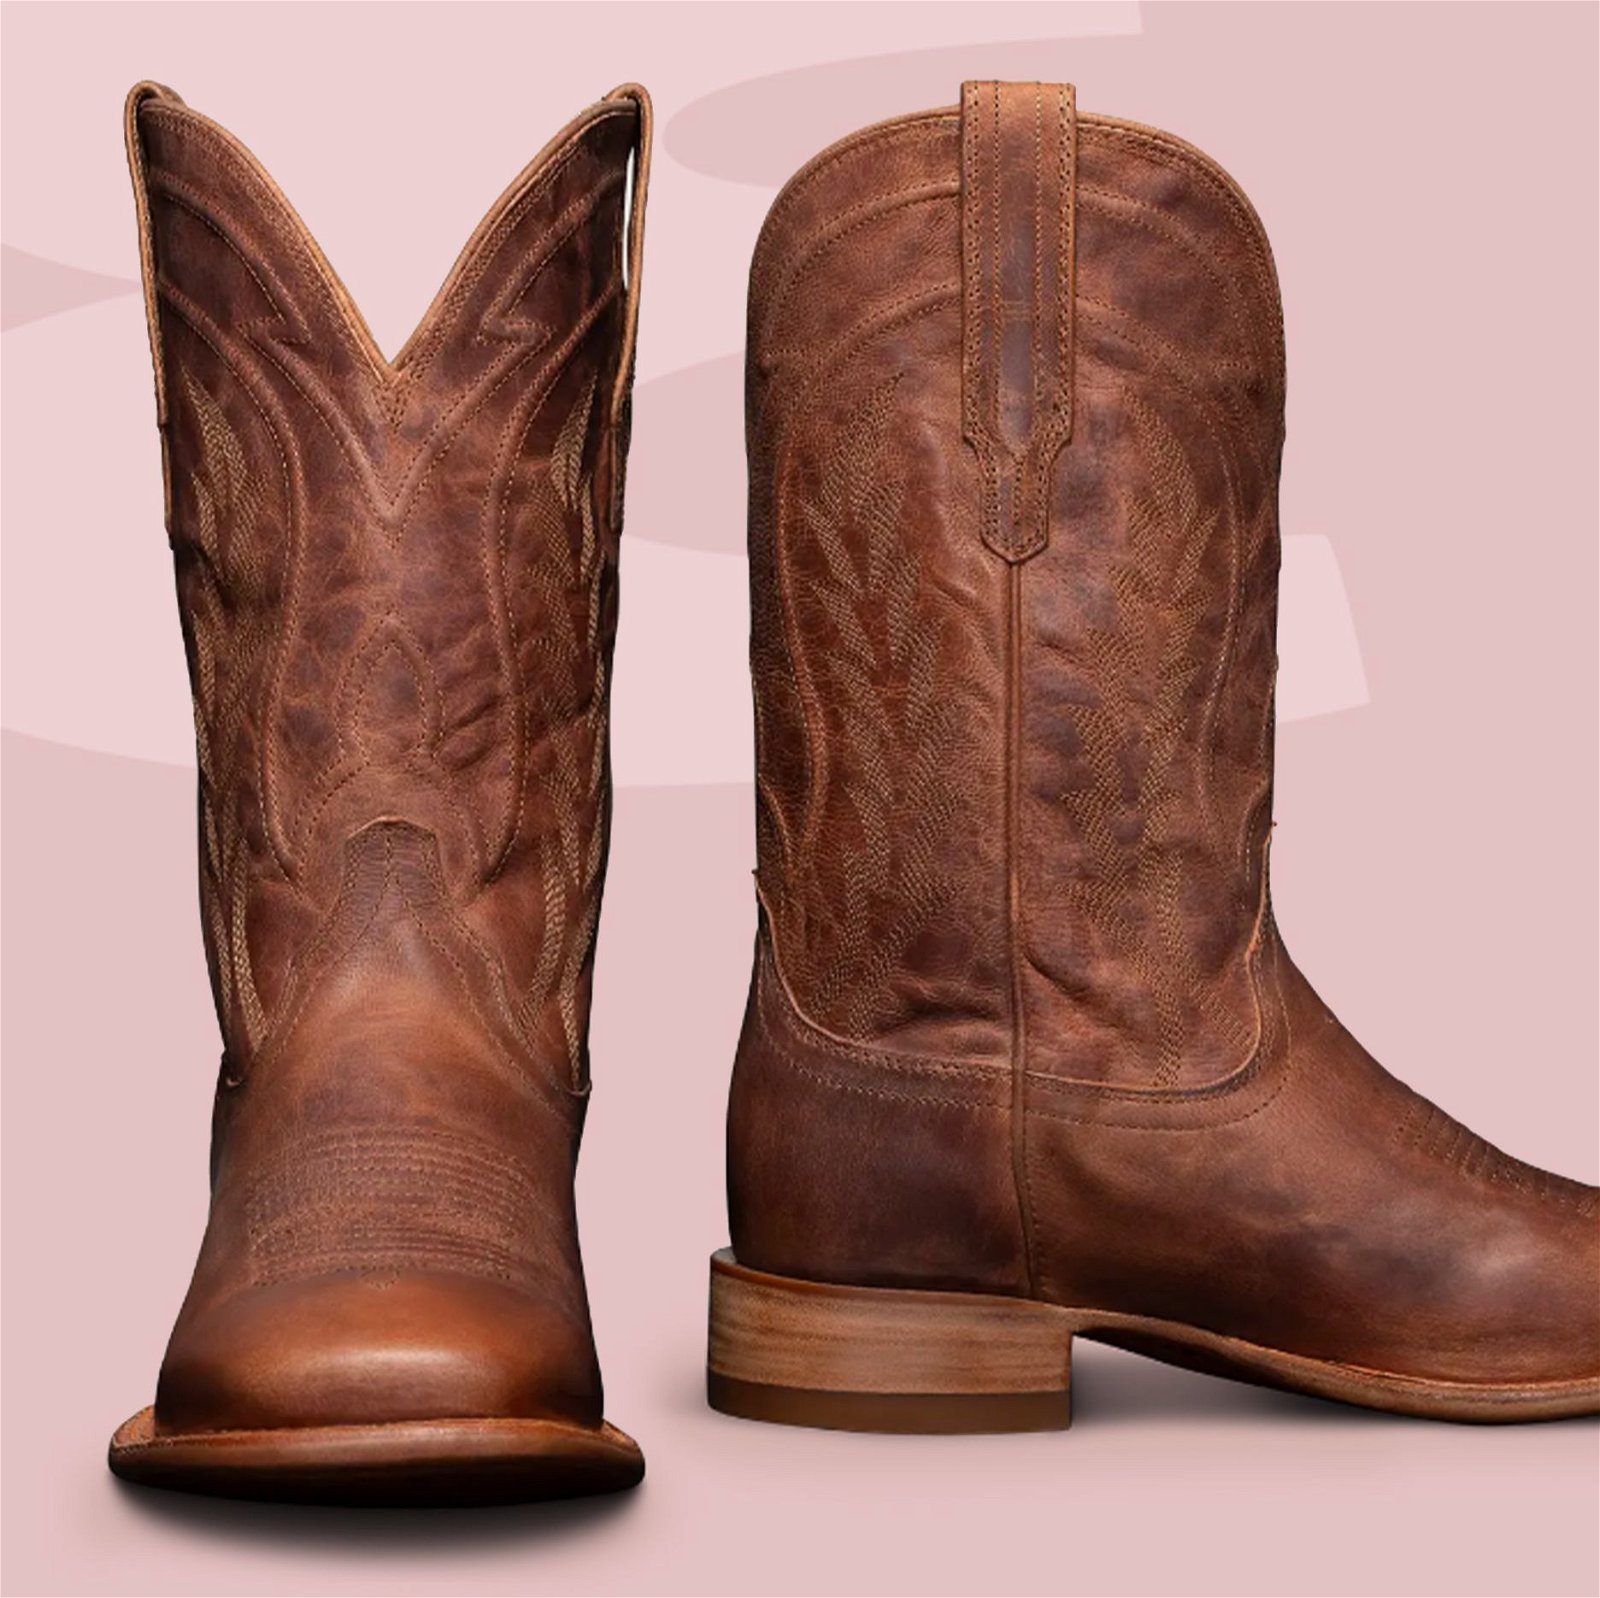 The Cowboy Boots We Love